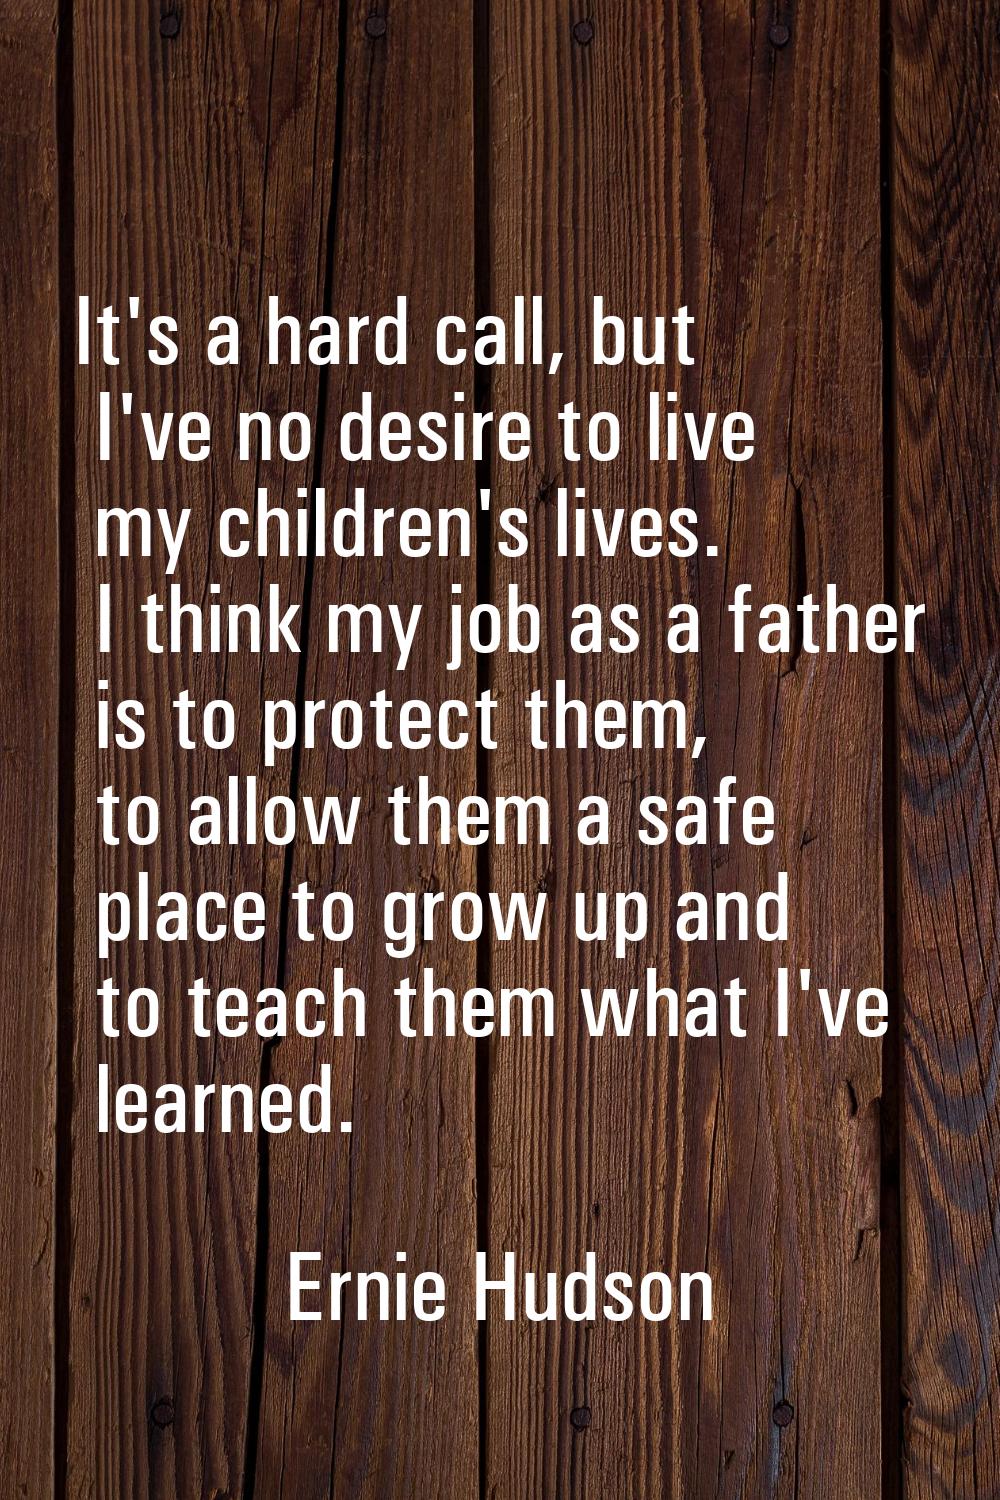 It's a hard call, but I've no desire to live my children's lives. I think my job as a father is to 